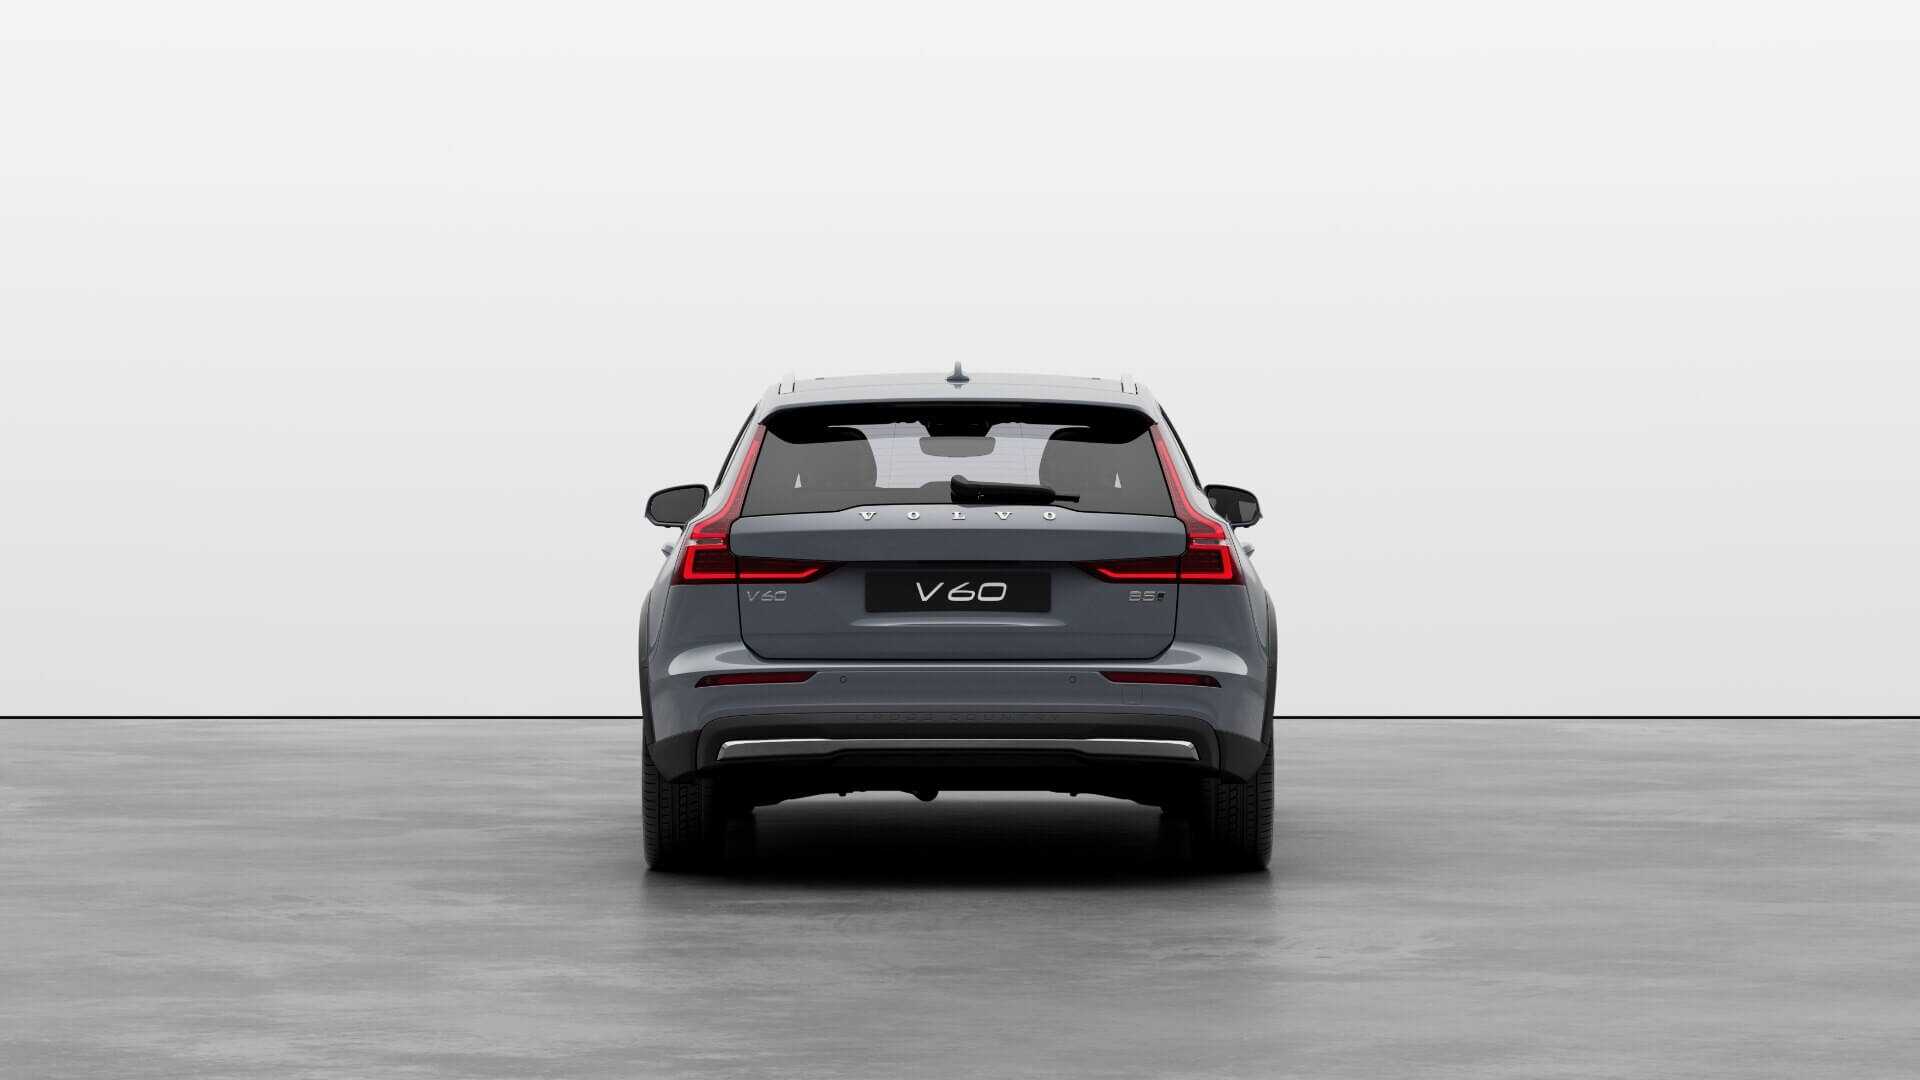 Meet our V60 Recharge plug-in hybrid wagon with Google built-in